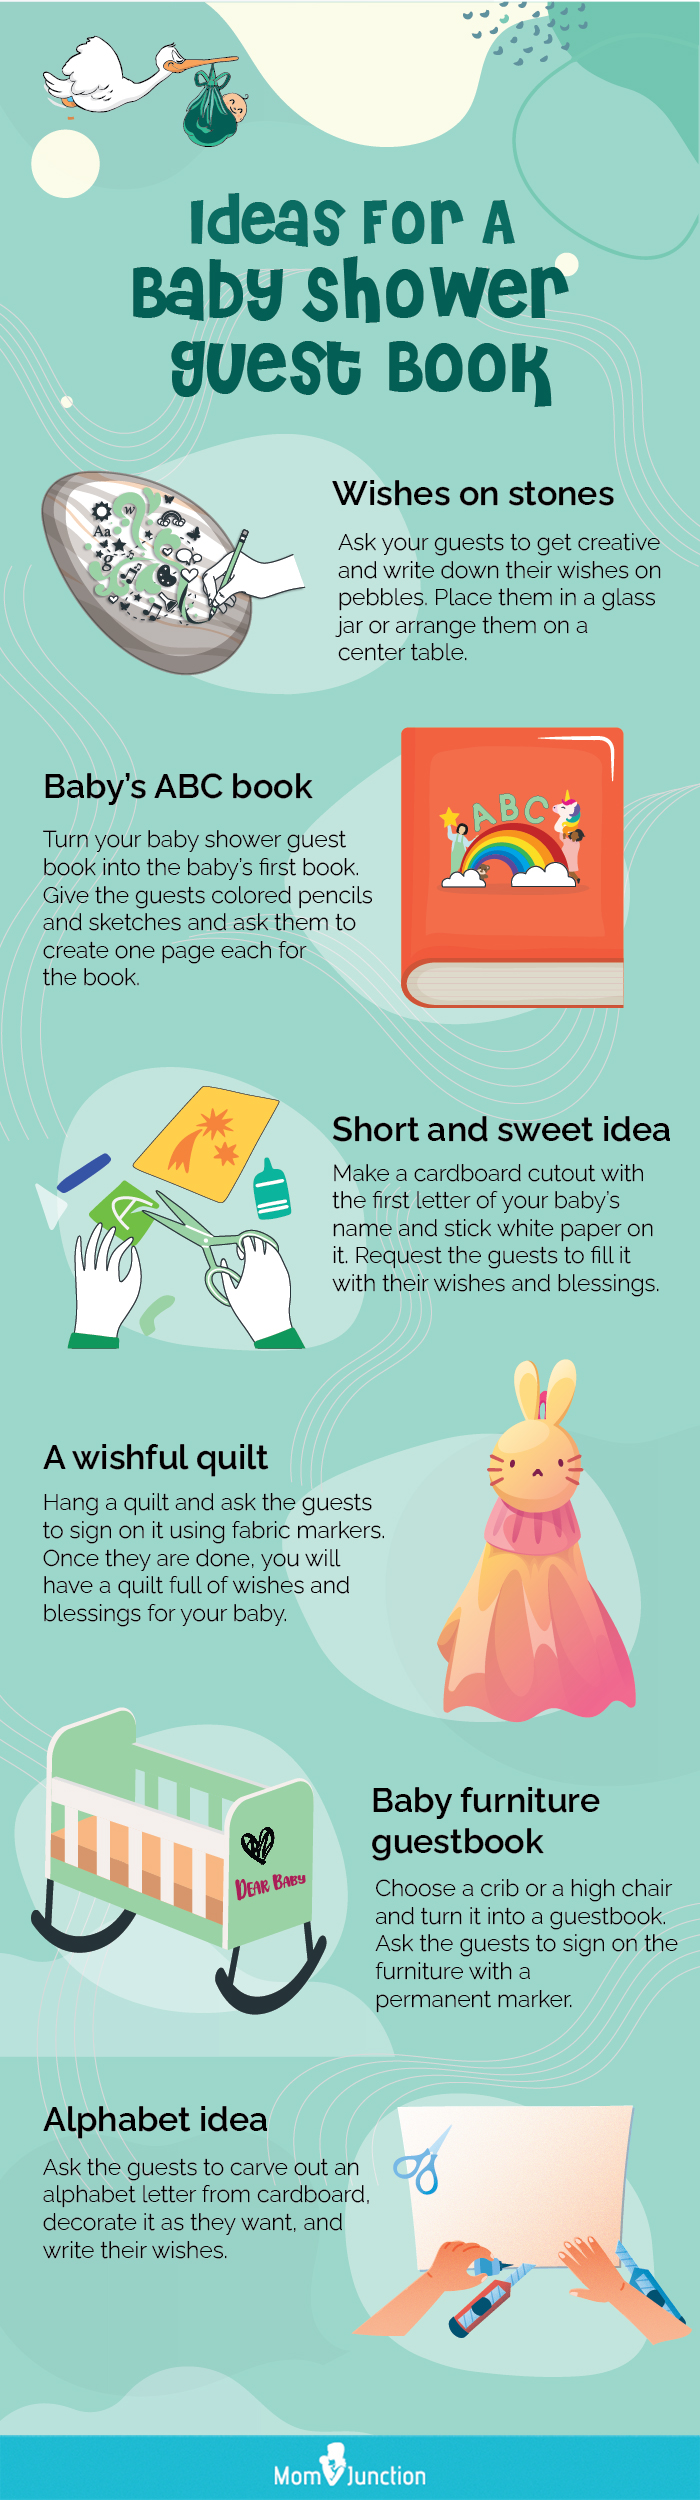 ideas for a baby shower guest book (infographic)